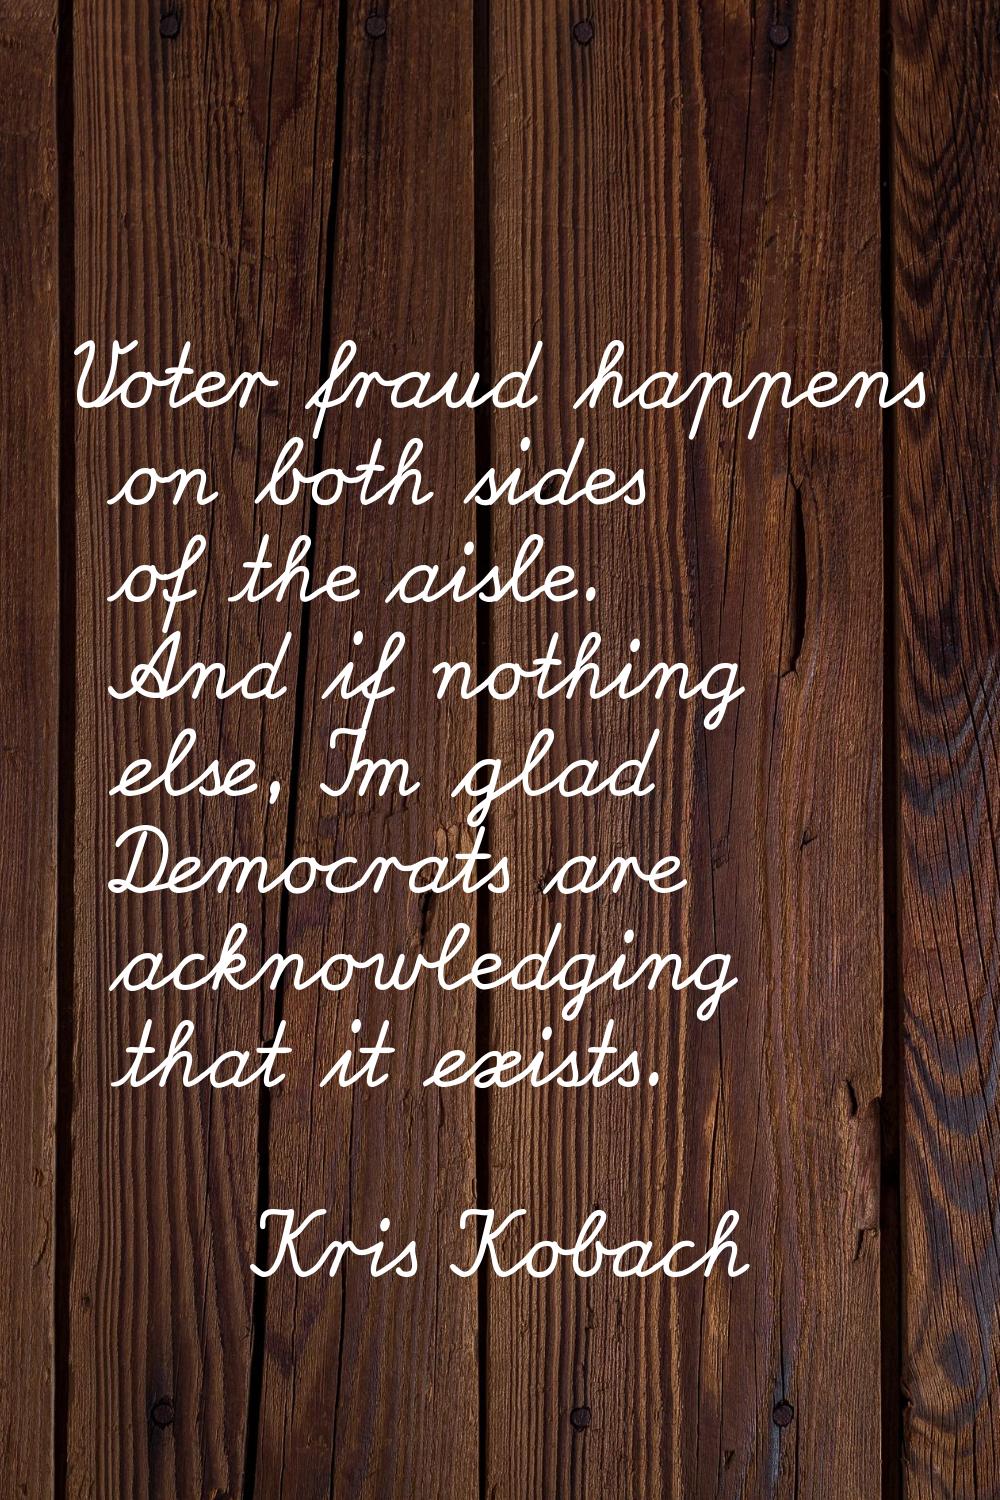 Voter fraud happens on both sides of the aisle. And if nothing else, I'm glad Democrats are acknowl